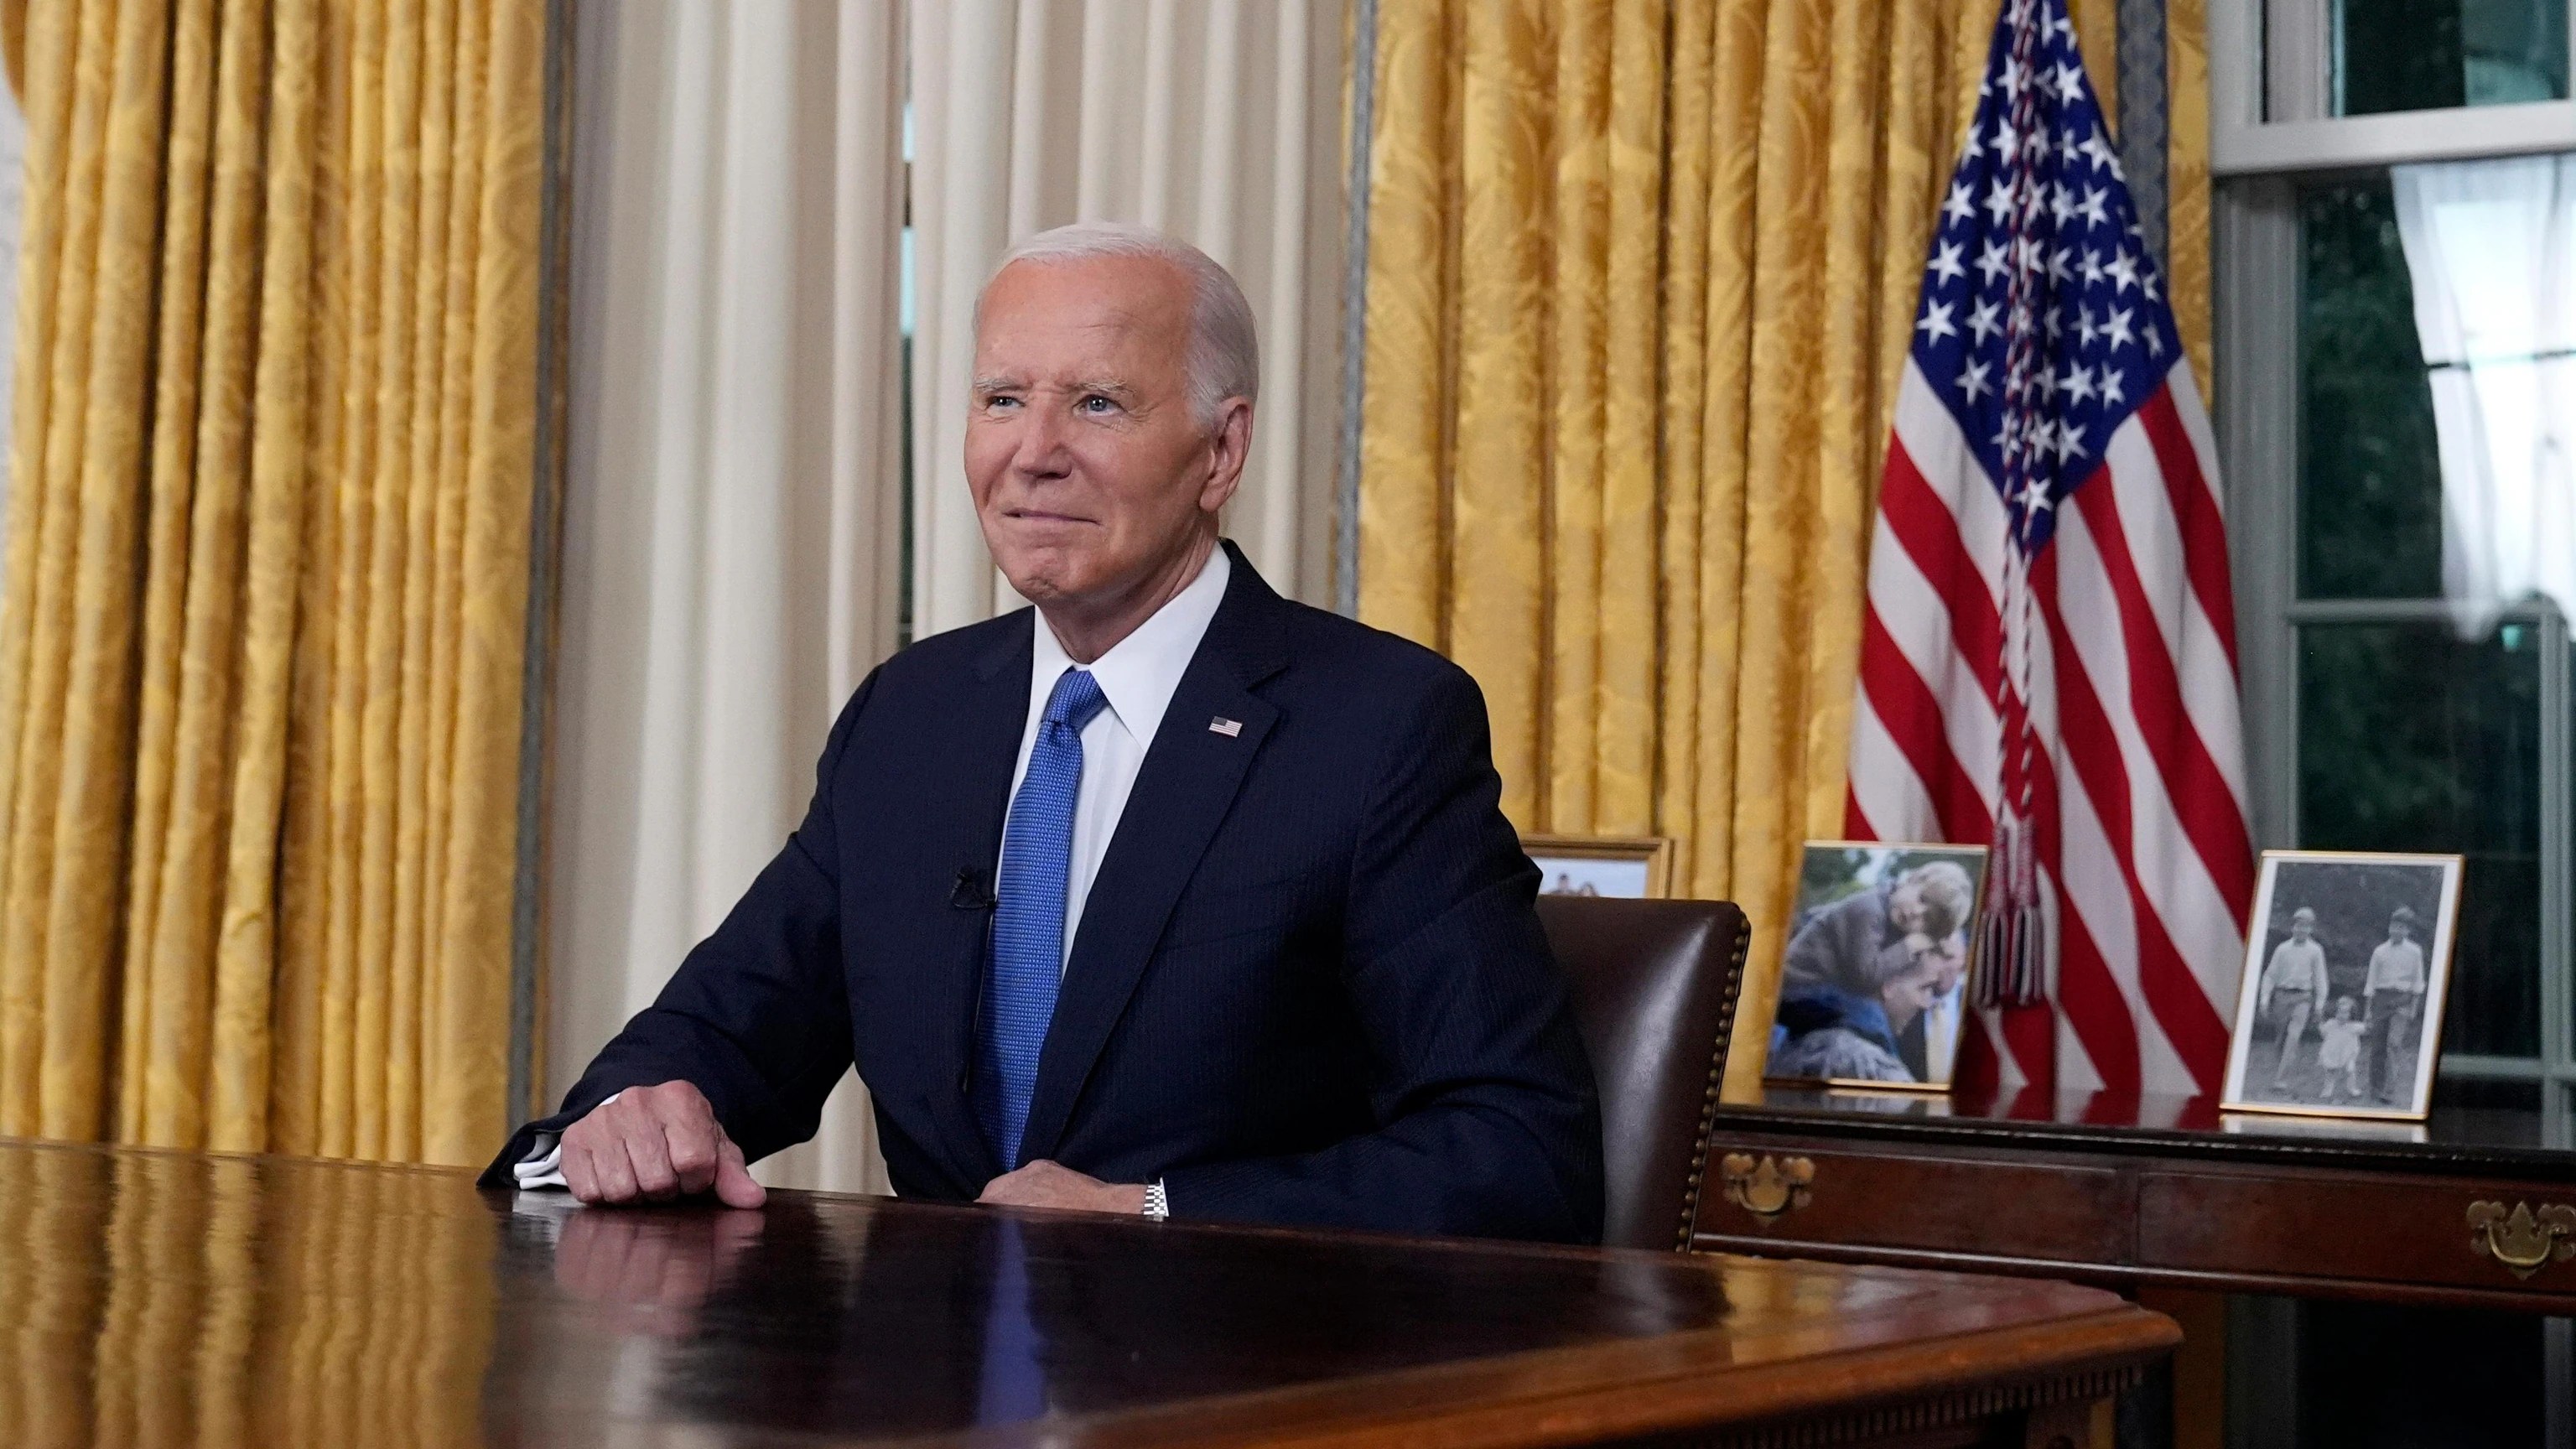 Biden signs bill strengthening oversight of crisis-plagued US Bureau of Prisons after AP reporting